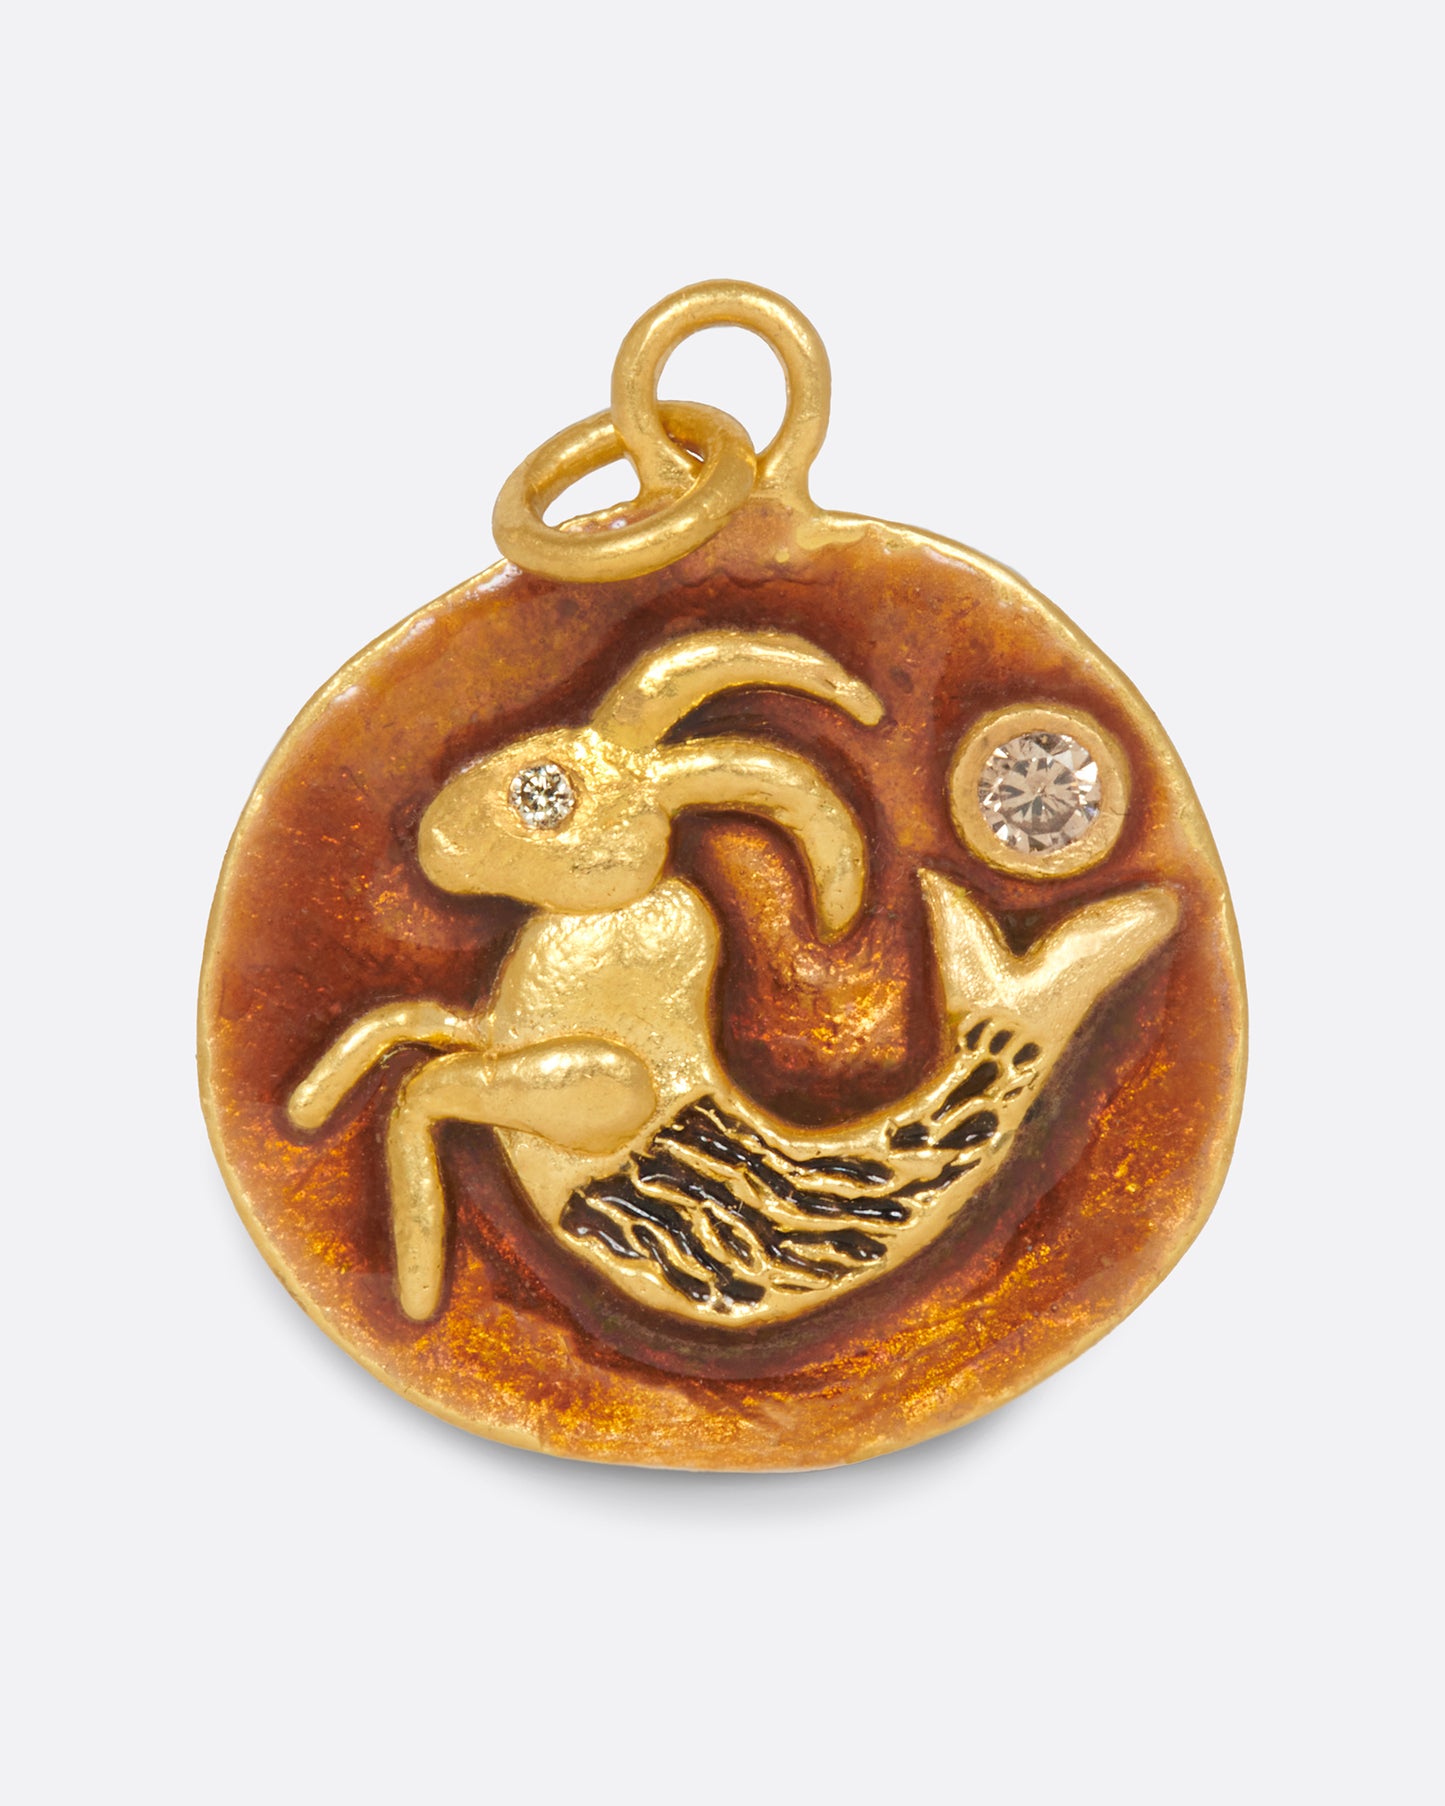 A round pendant featuring a hand-sculpted Capricorn with diamond accents.